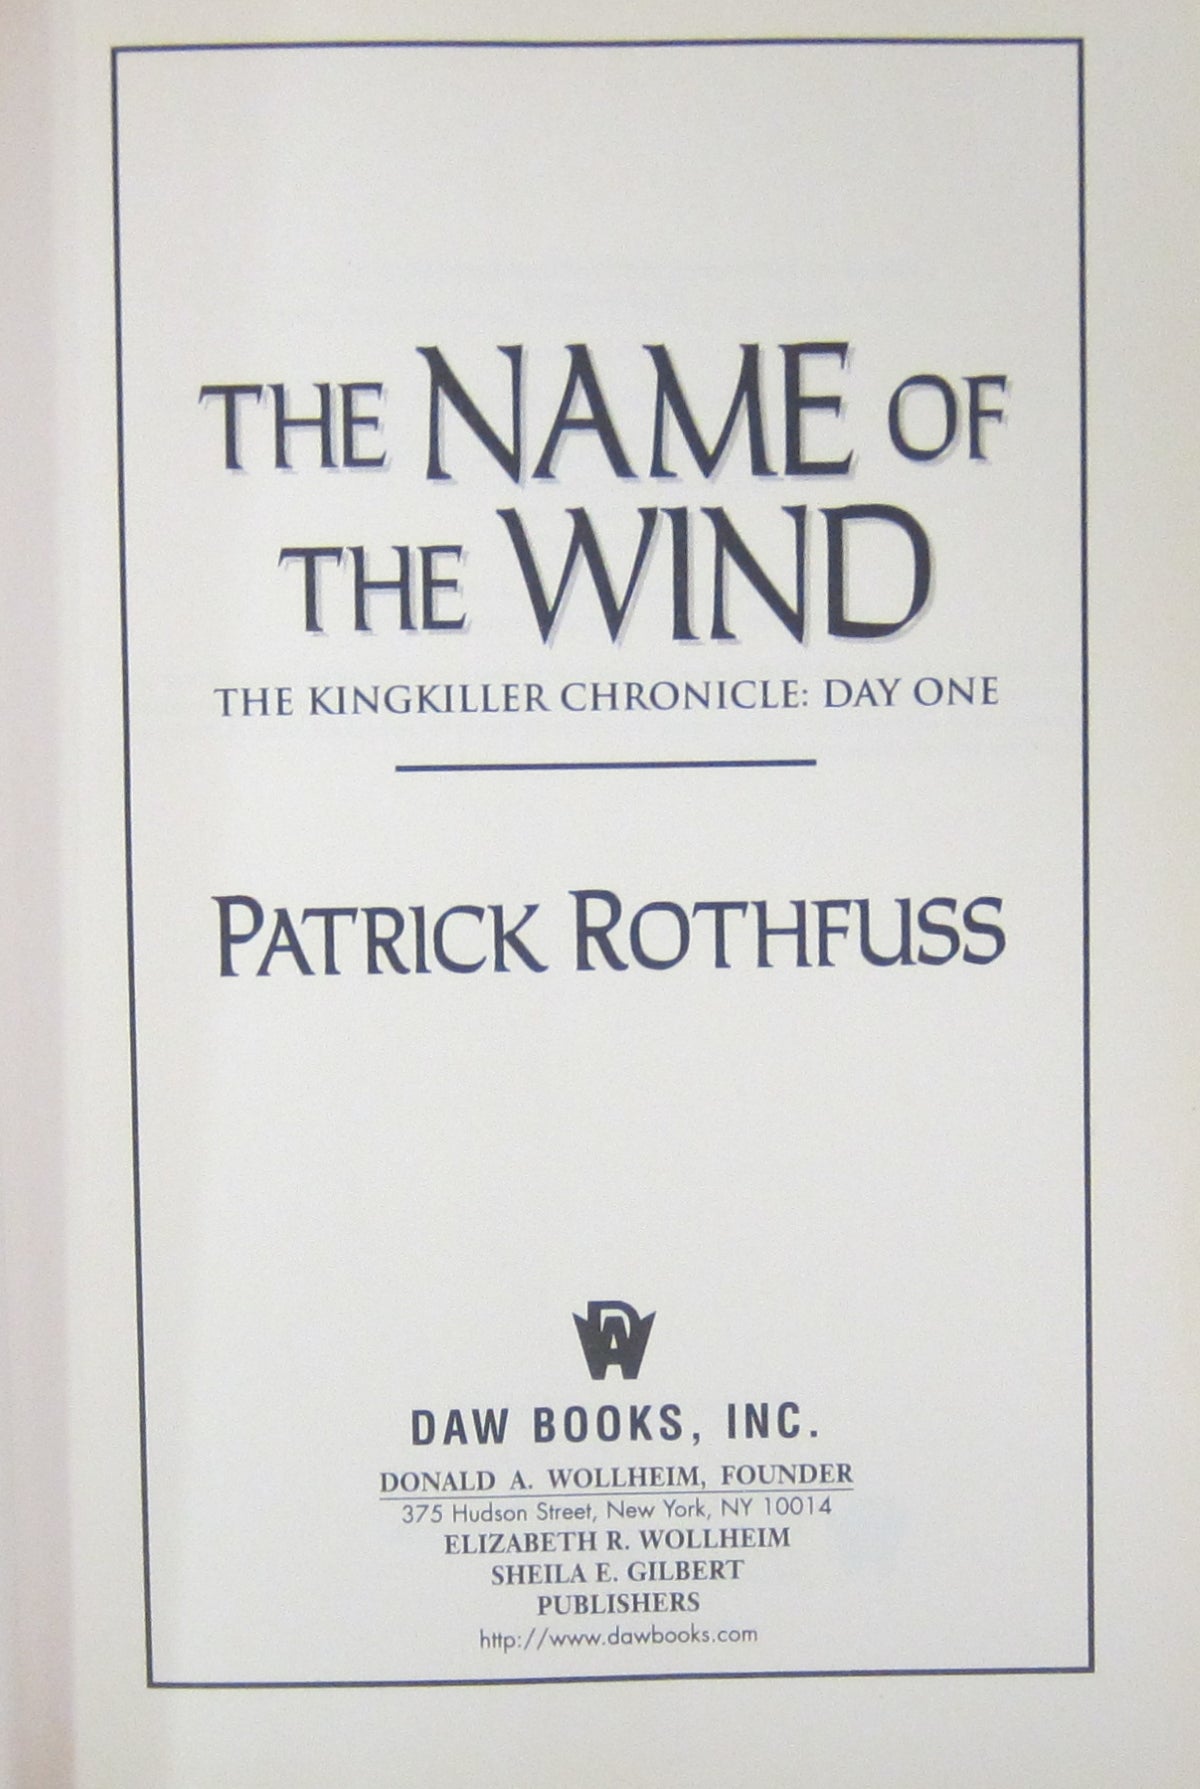 Rothfussians - Name of the Wind (Book 1): The Name of the Wind